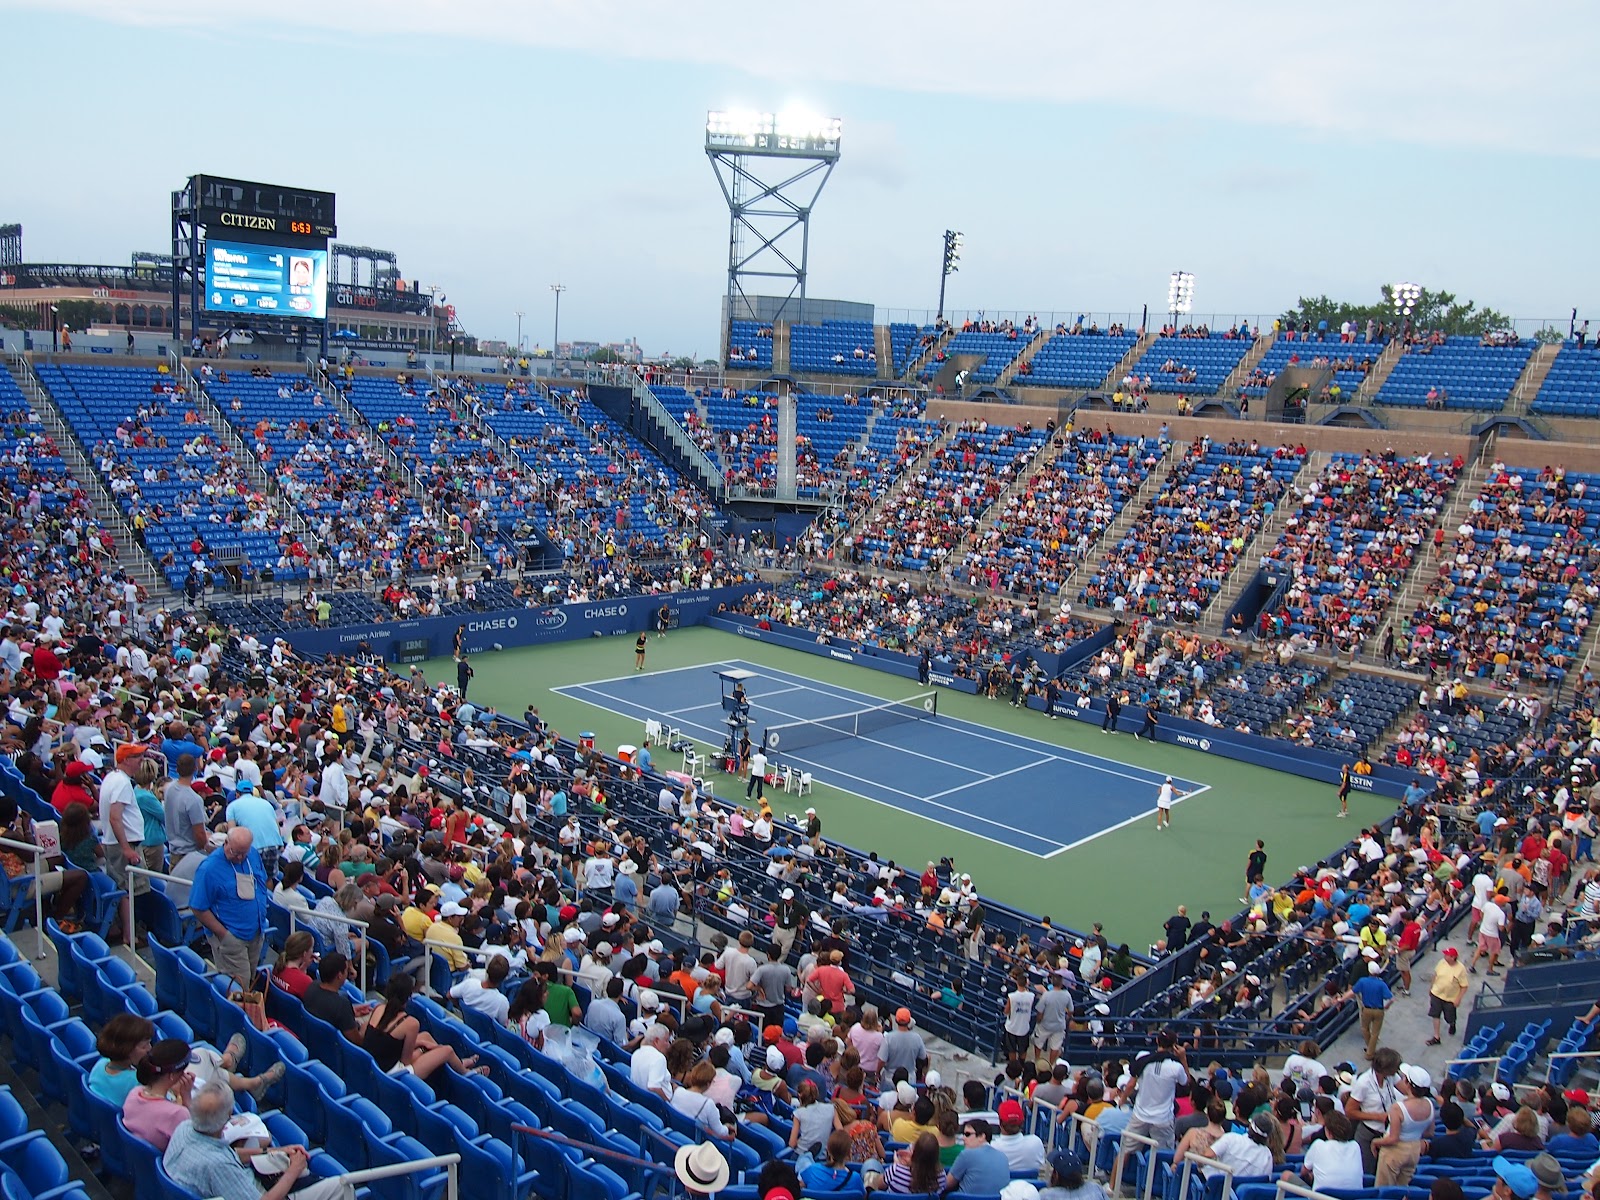 One Picture a Day from New York City: Louis Armstrong Stadium, US Open